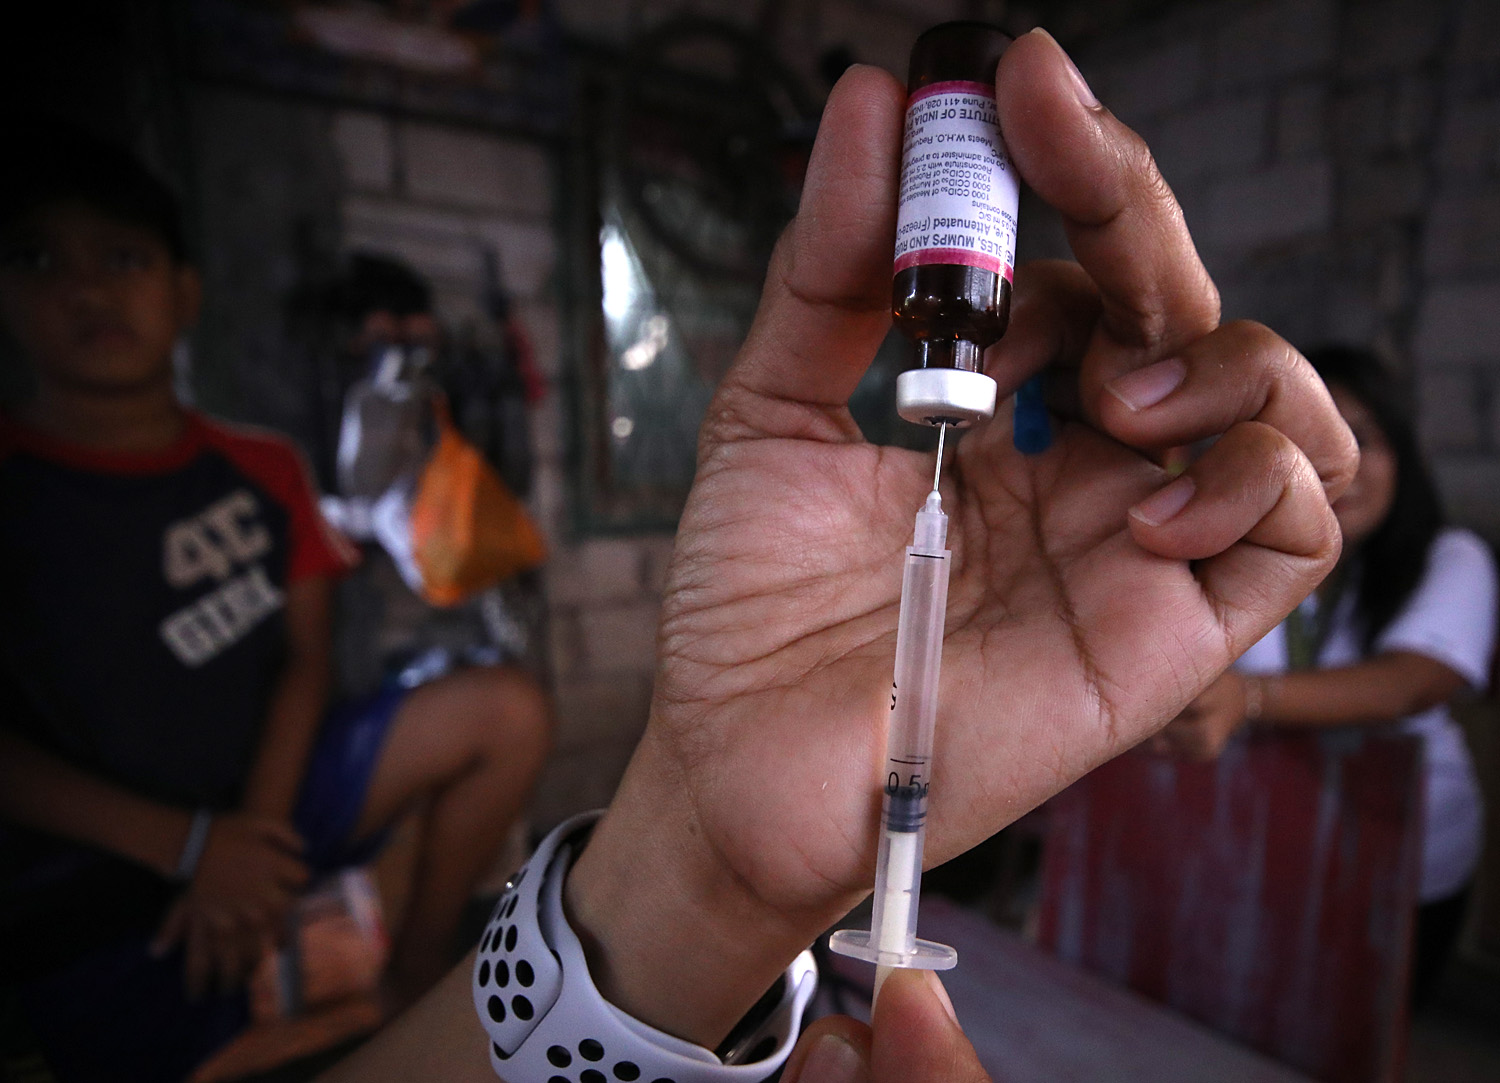 PROTECTION. Barangay Payatas community health workers go door-to-door for measles vaccination after the Department of Health announced an outbreak in several regions in the country. Photo by Darren Langit/Rappler 